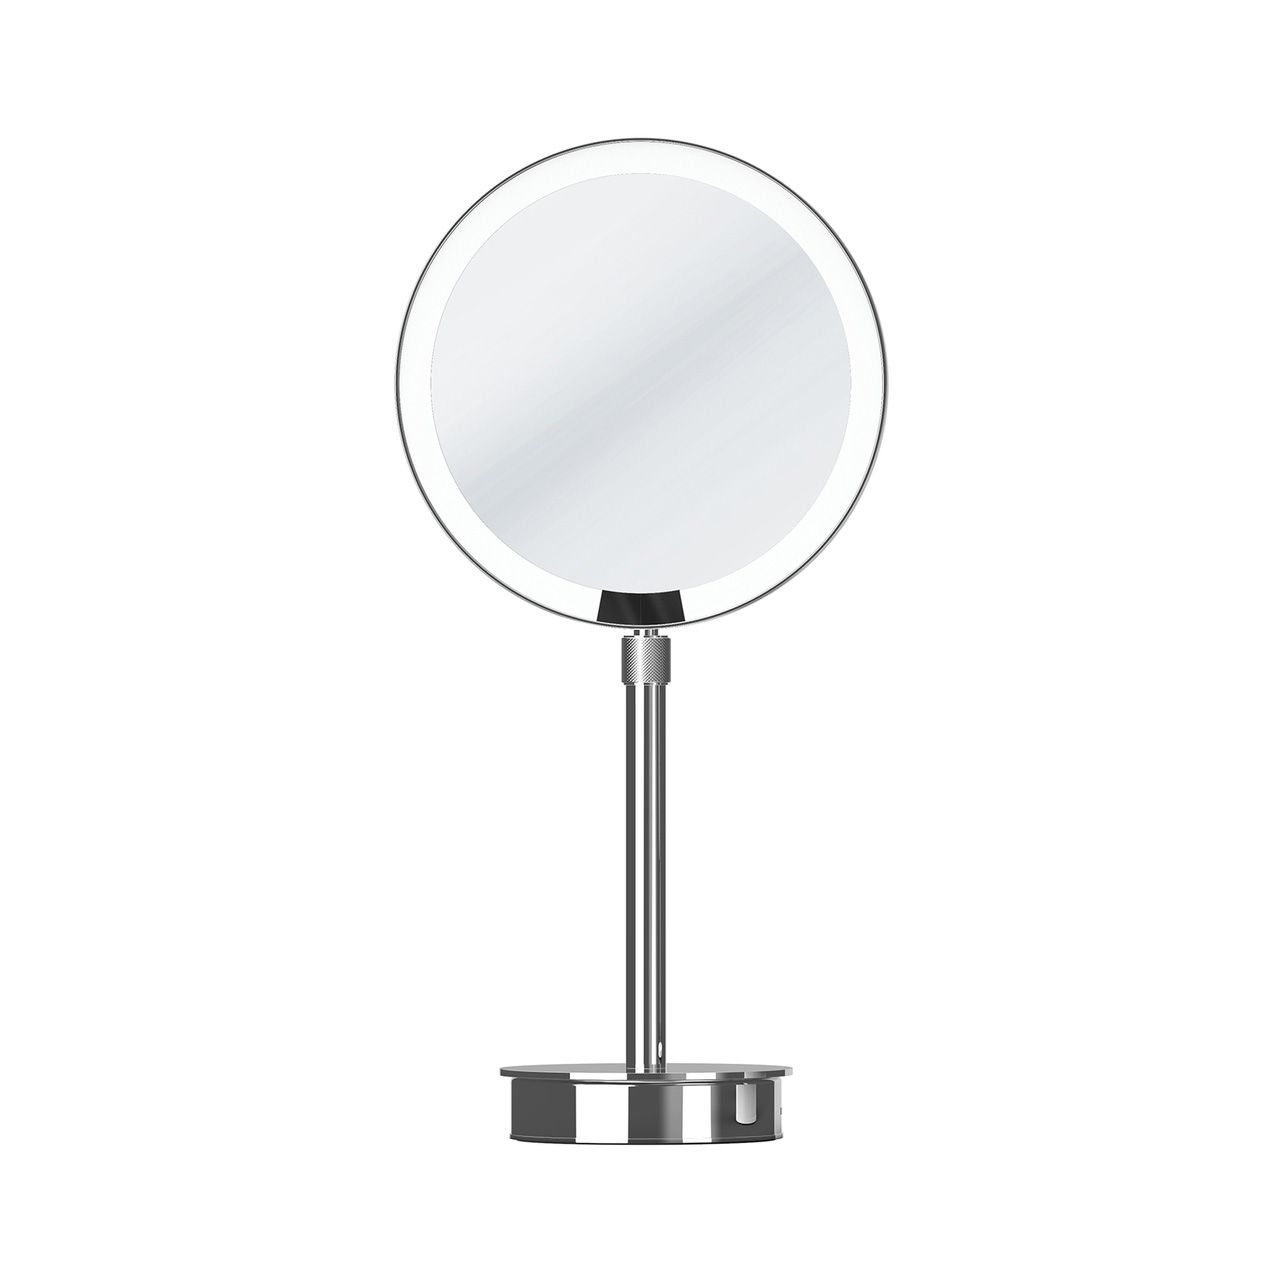 What Type of Magnifying Mirror Will Be Used?